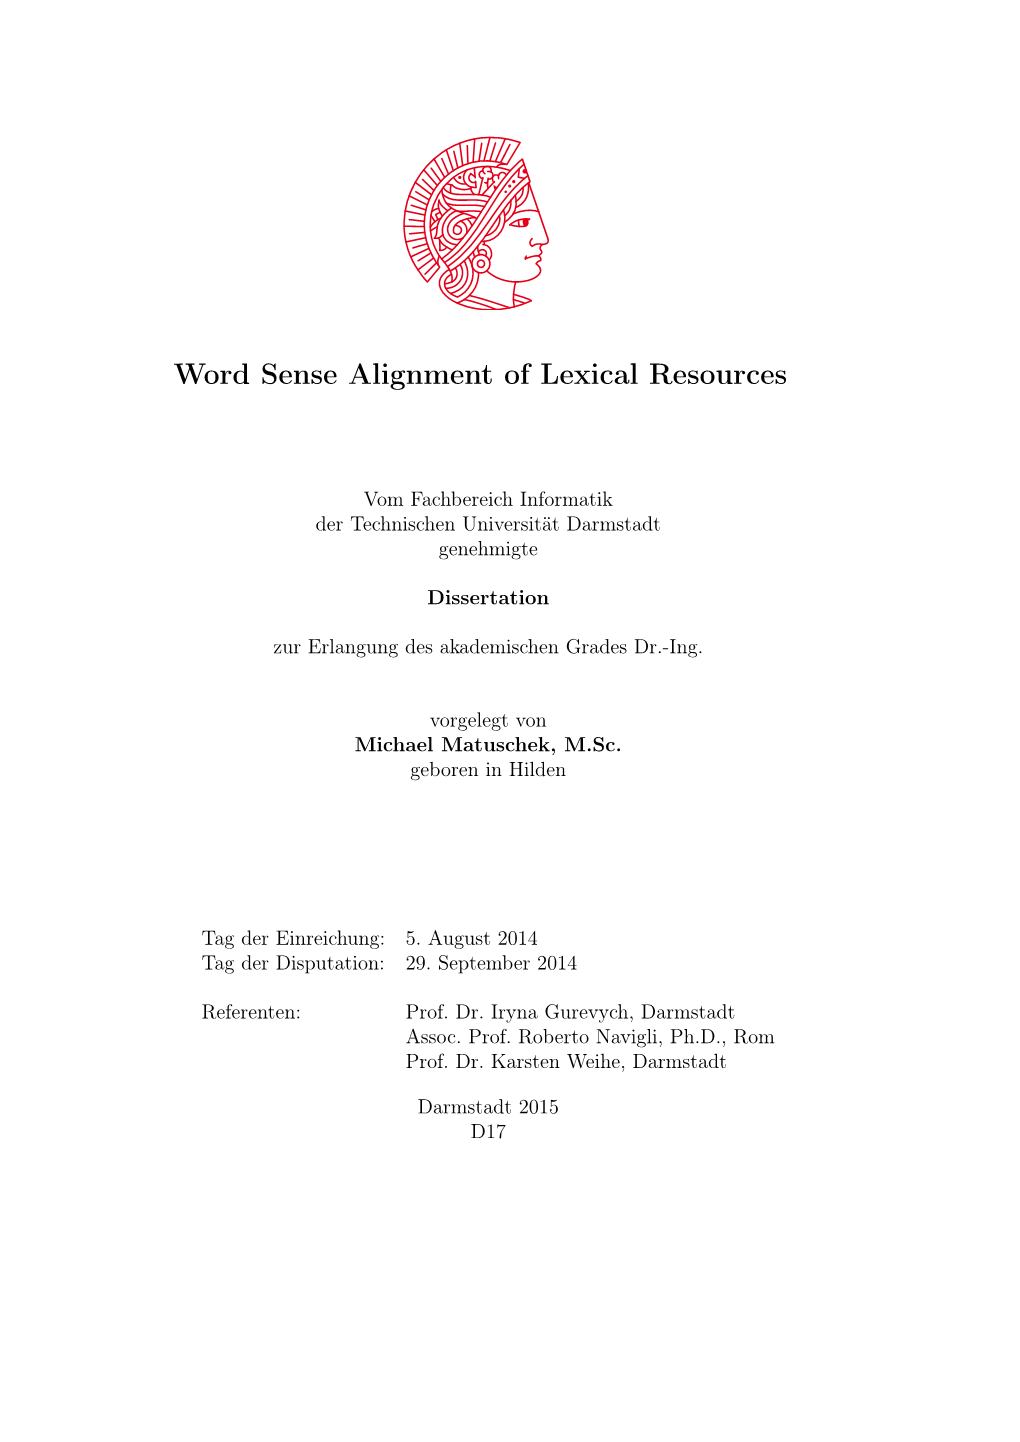 Word Sense Alignment of Lexical Resources